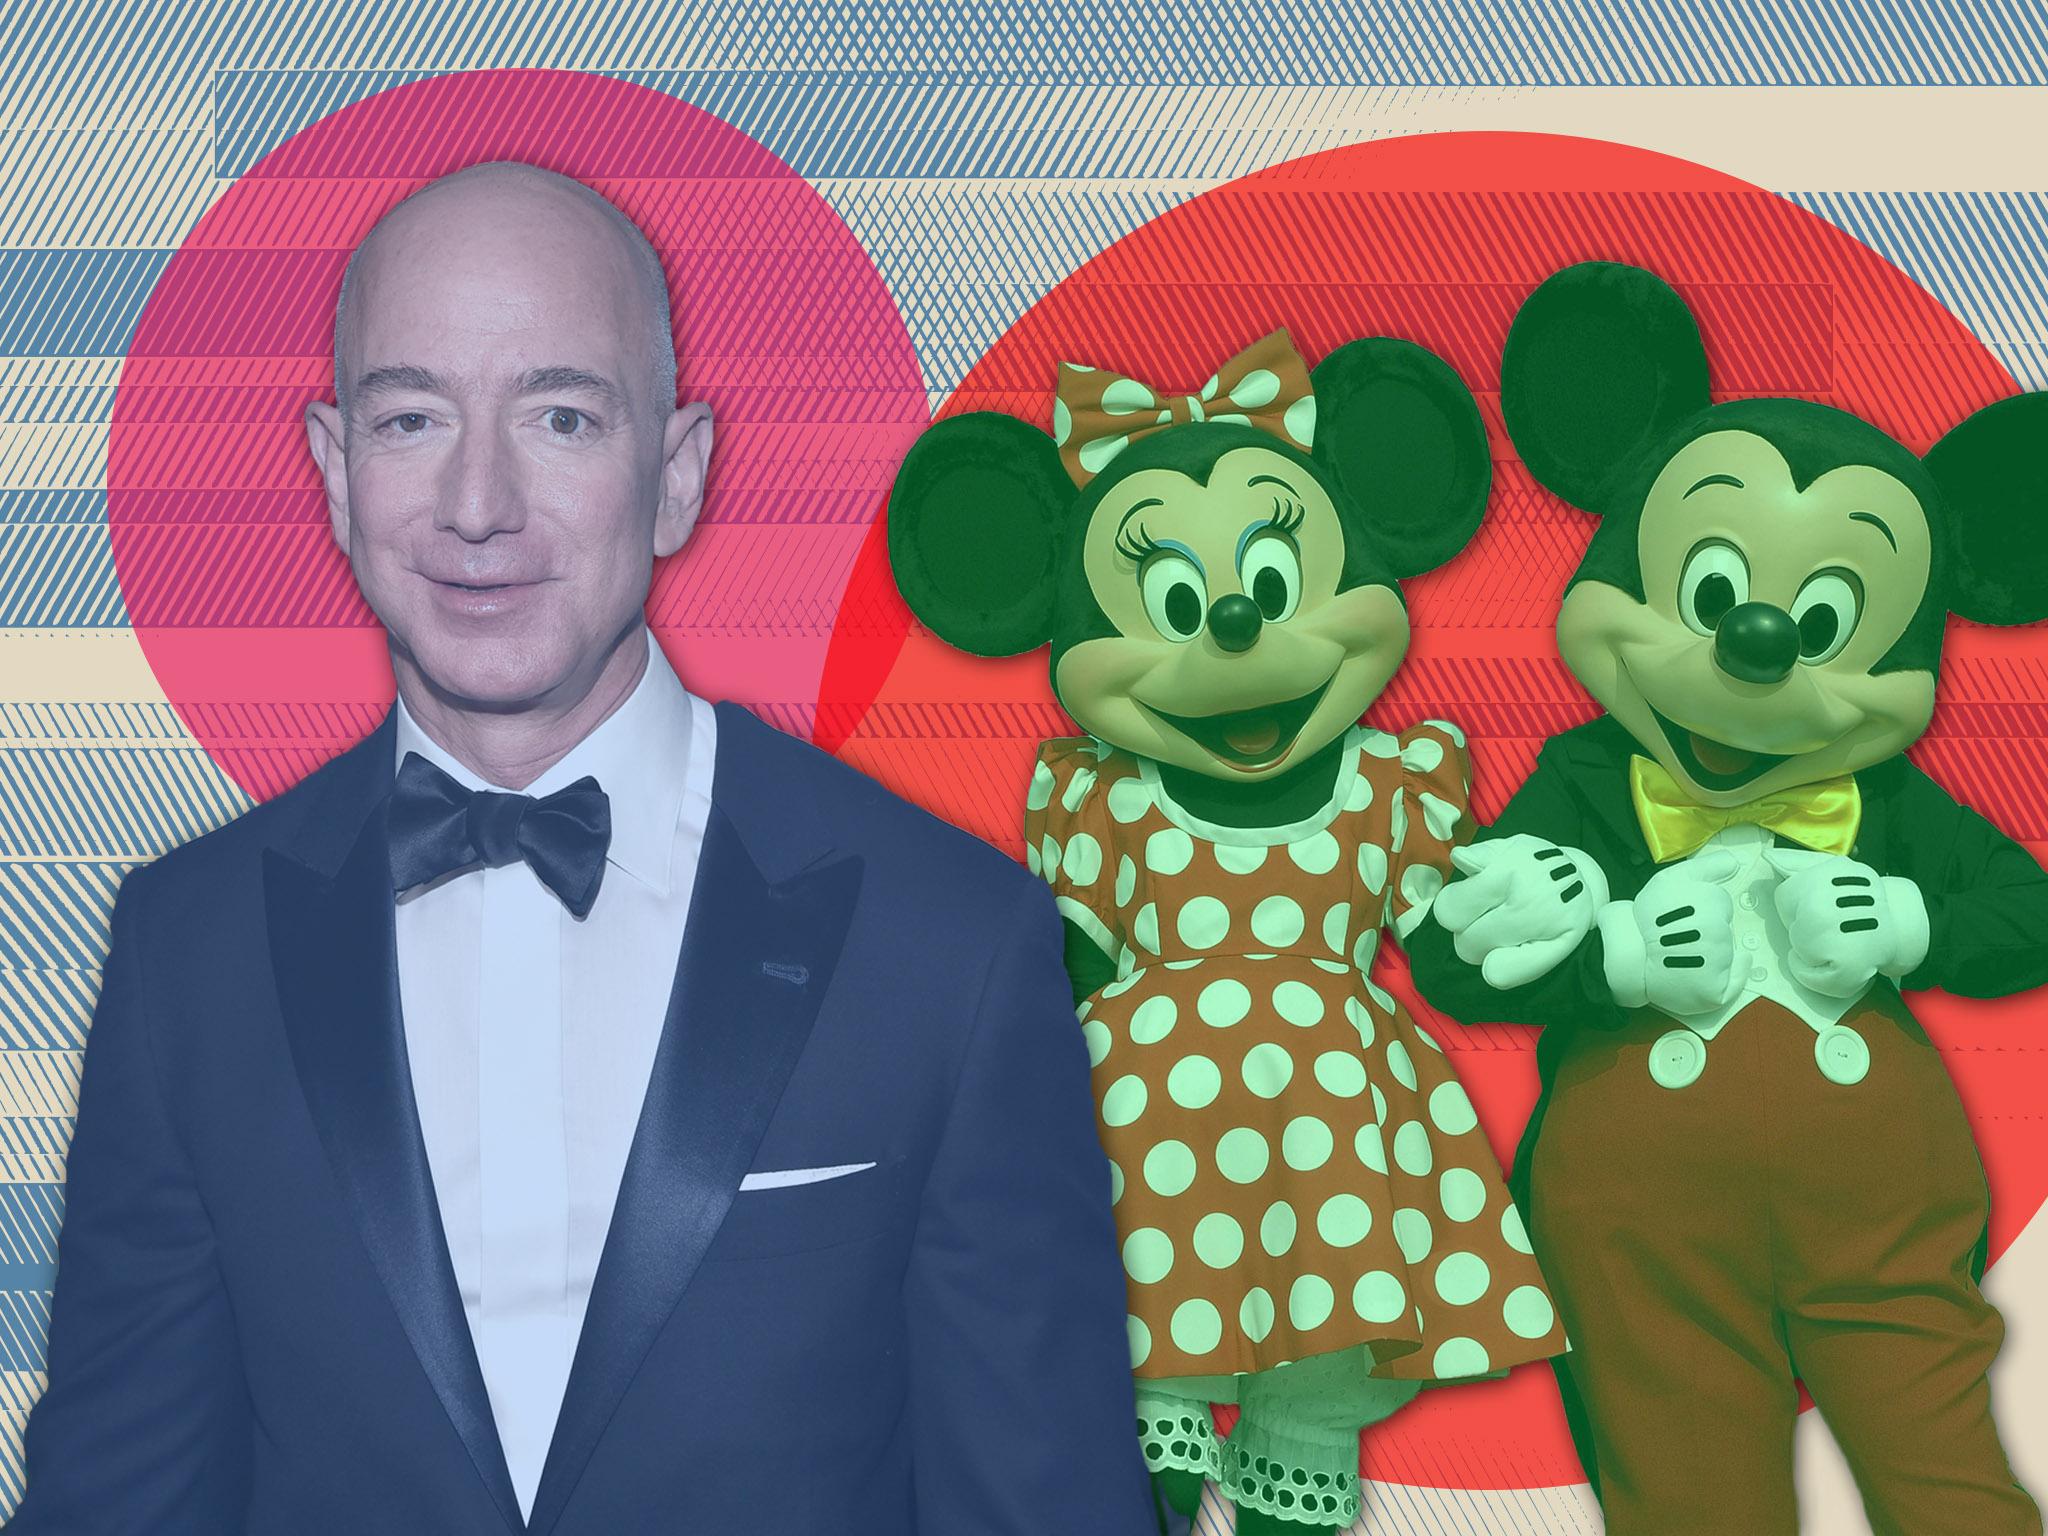 The House of Mouse has made a big bet on streaming